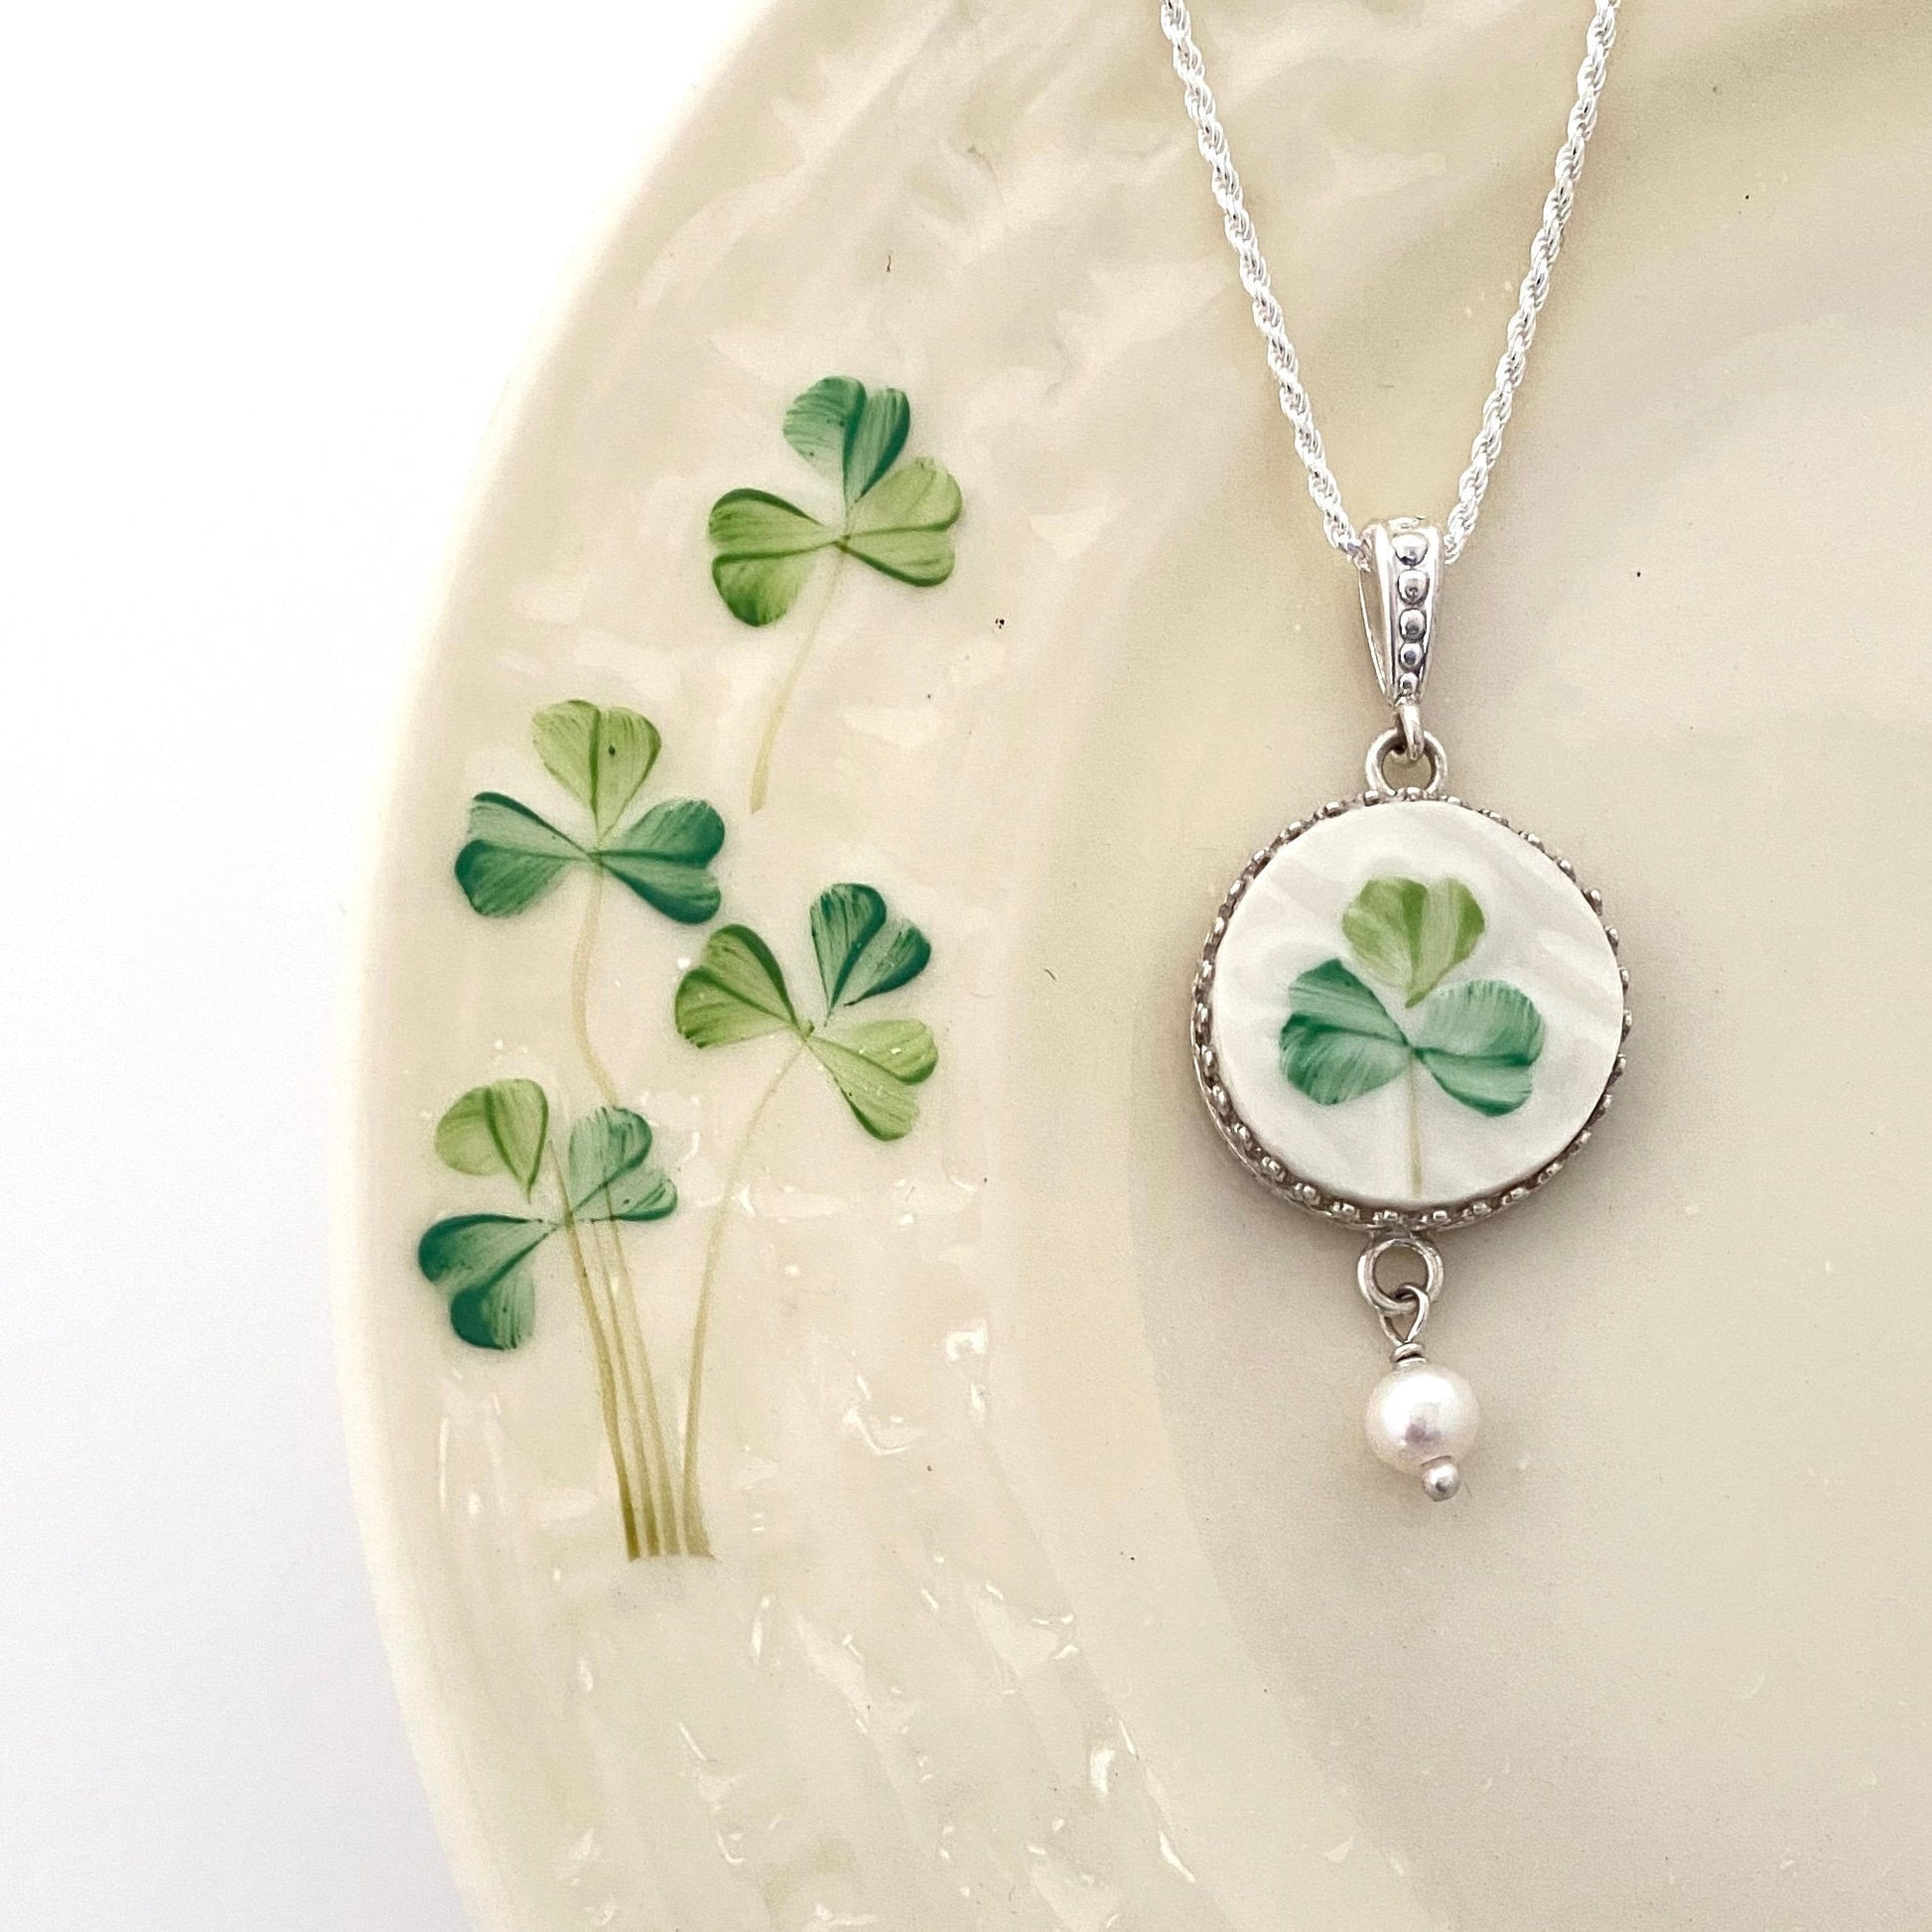 Handmade Irish Jewelry, Belleek Broken China Jewelry, Unique 20th Anniversary Gift for Wife, Celtic Silver Pearl Necklace